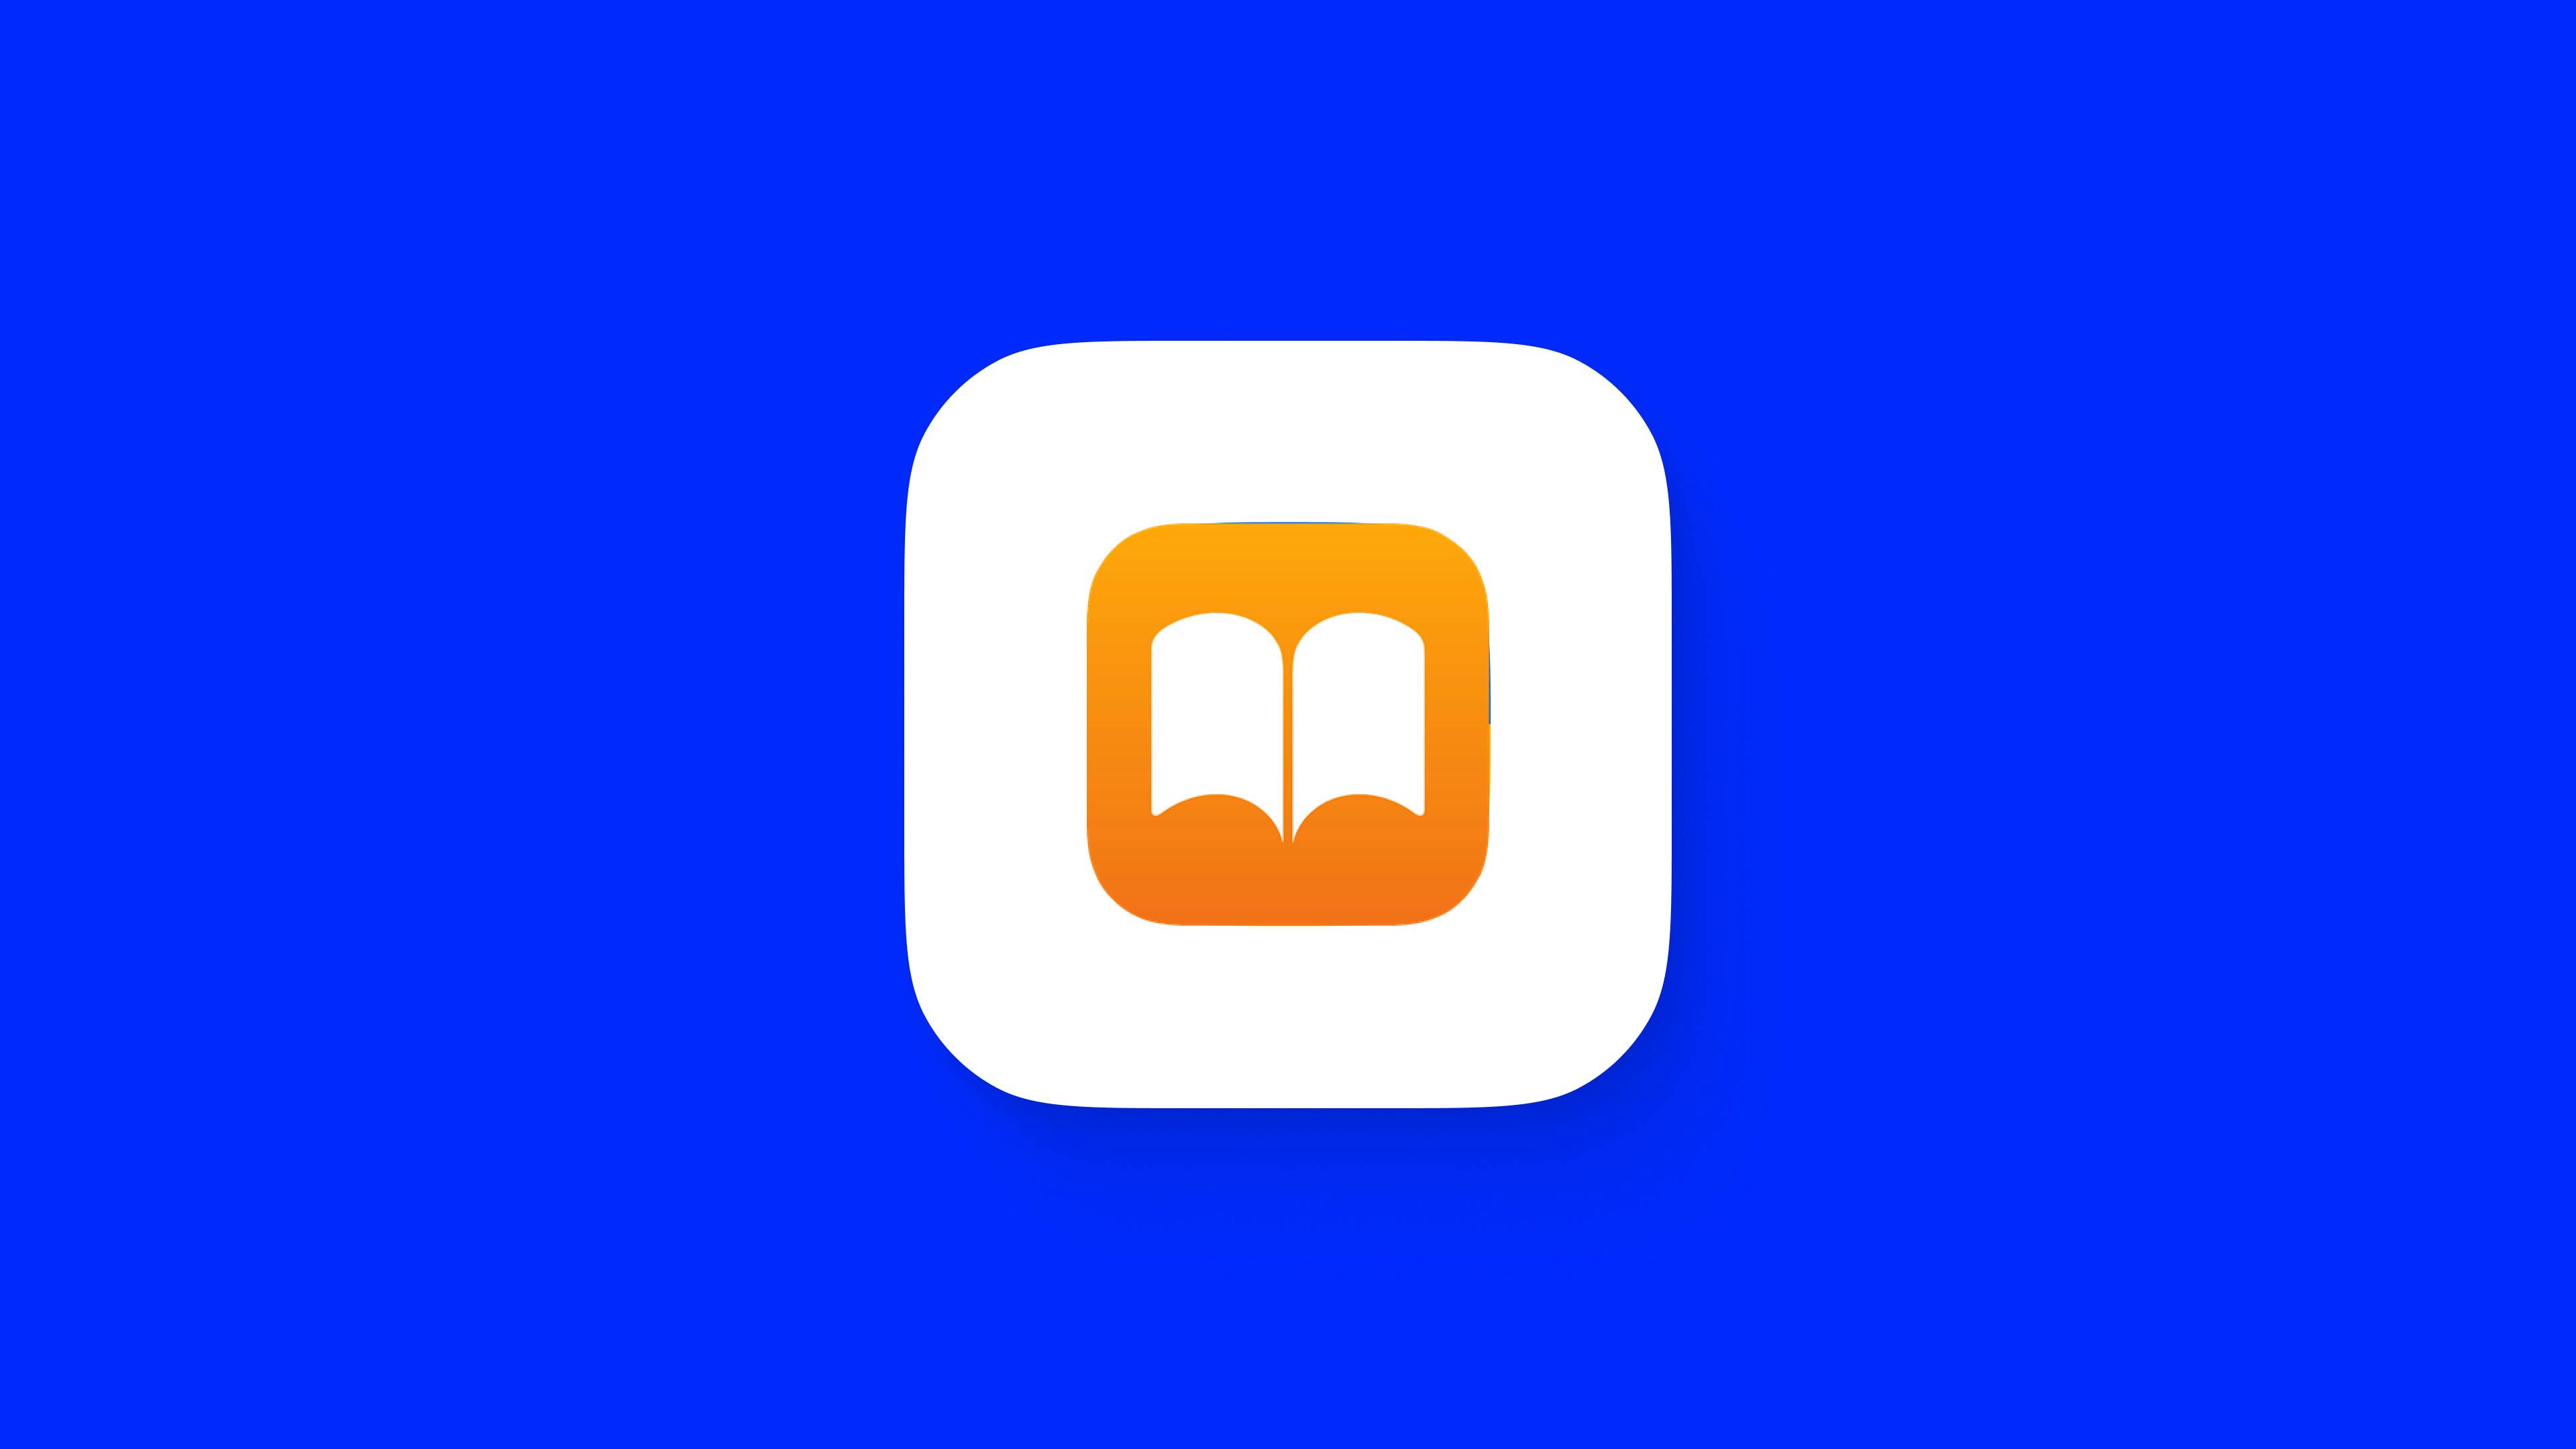 Apple Books For Listening To Books - Headway App